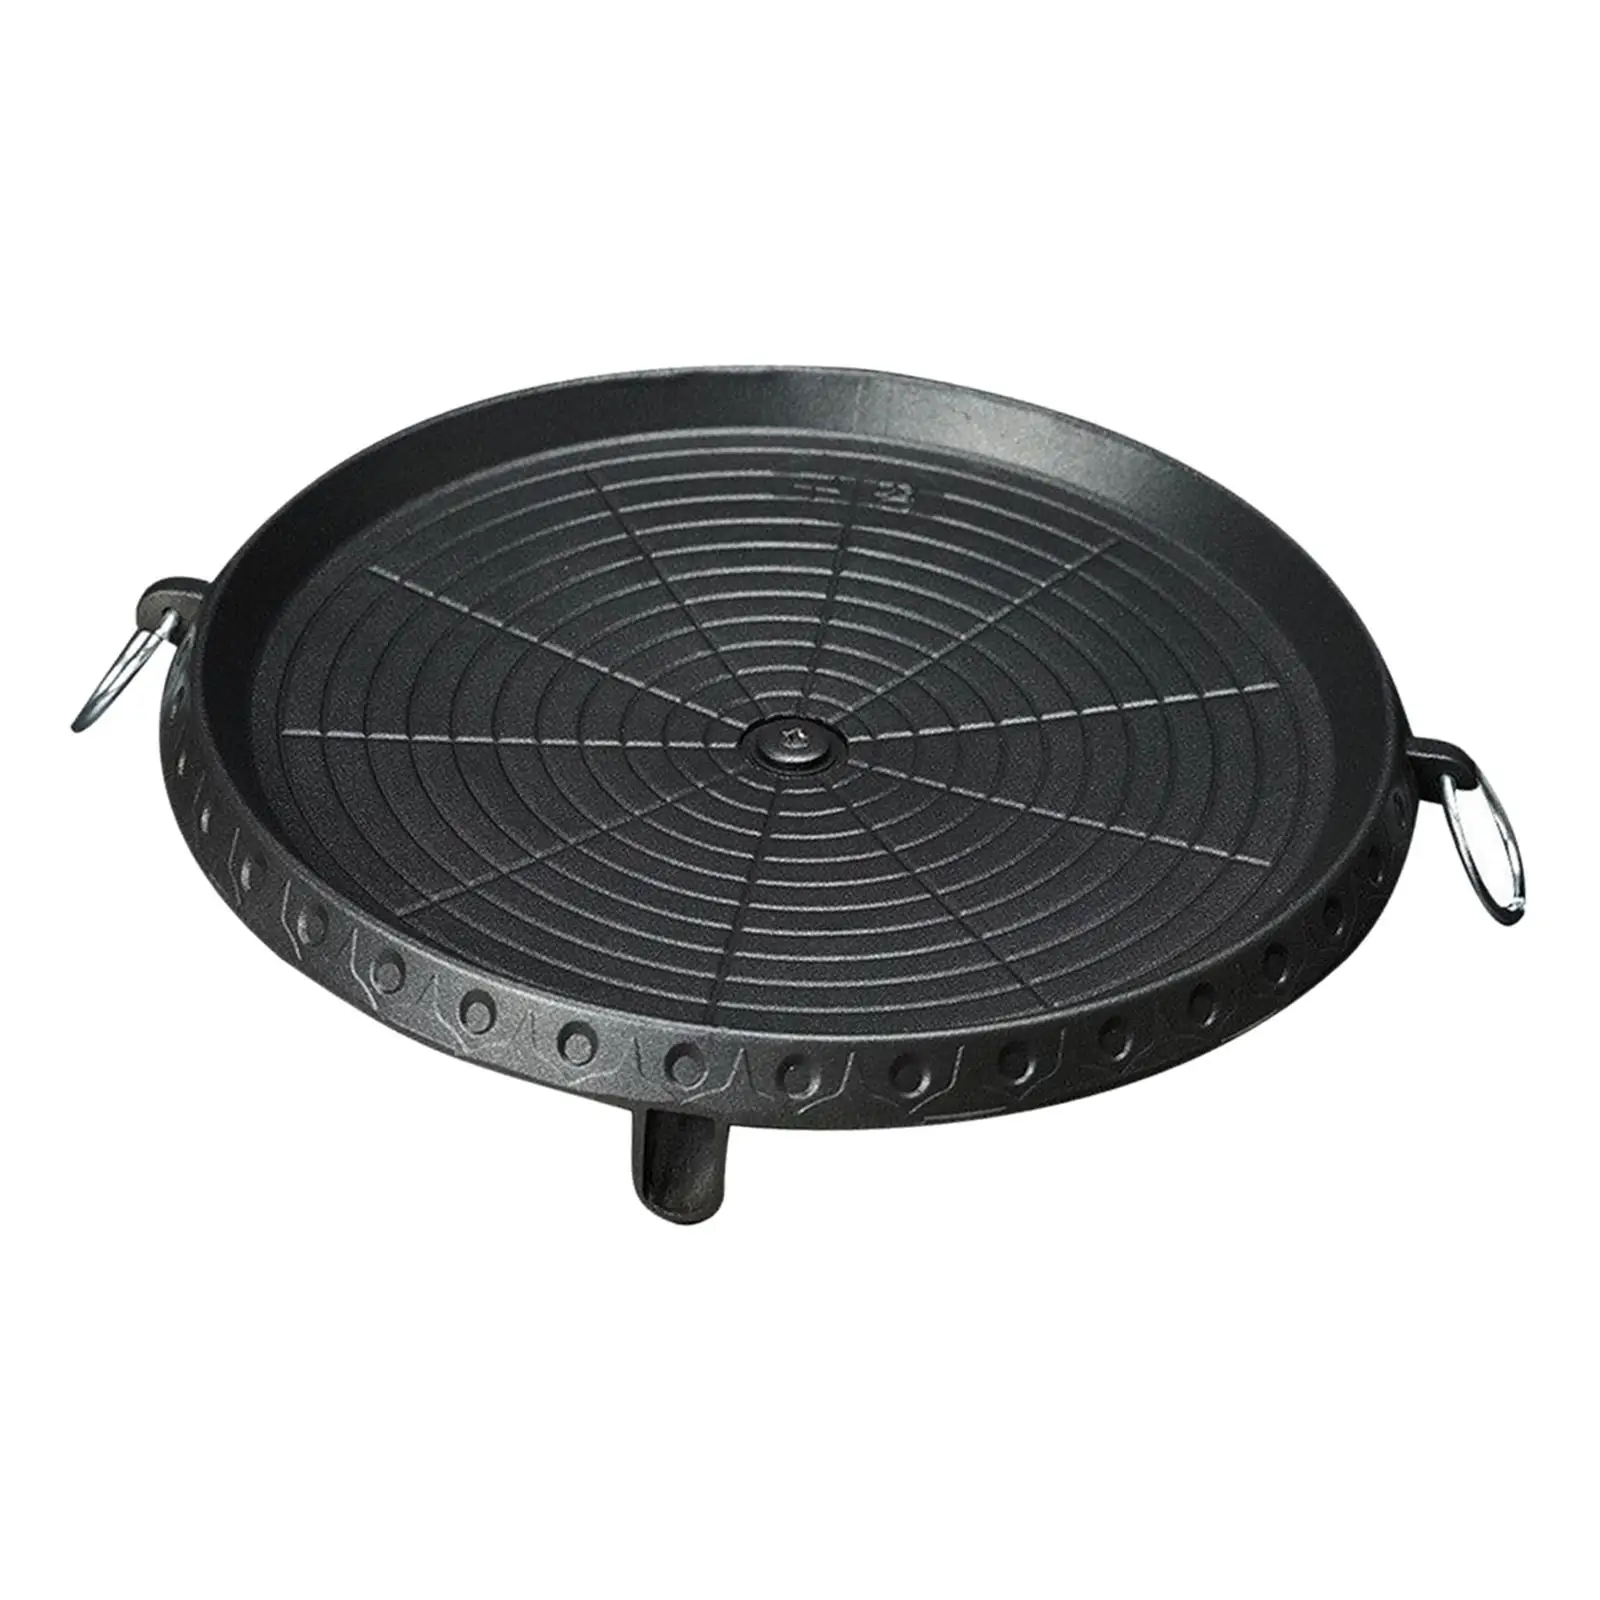 Portable Frying Pan Griddle Pot Baking Skillet with Handle Induction Grill Pan Indoor Outdoor Barbecue Steak Picnic BBQ